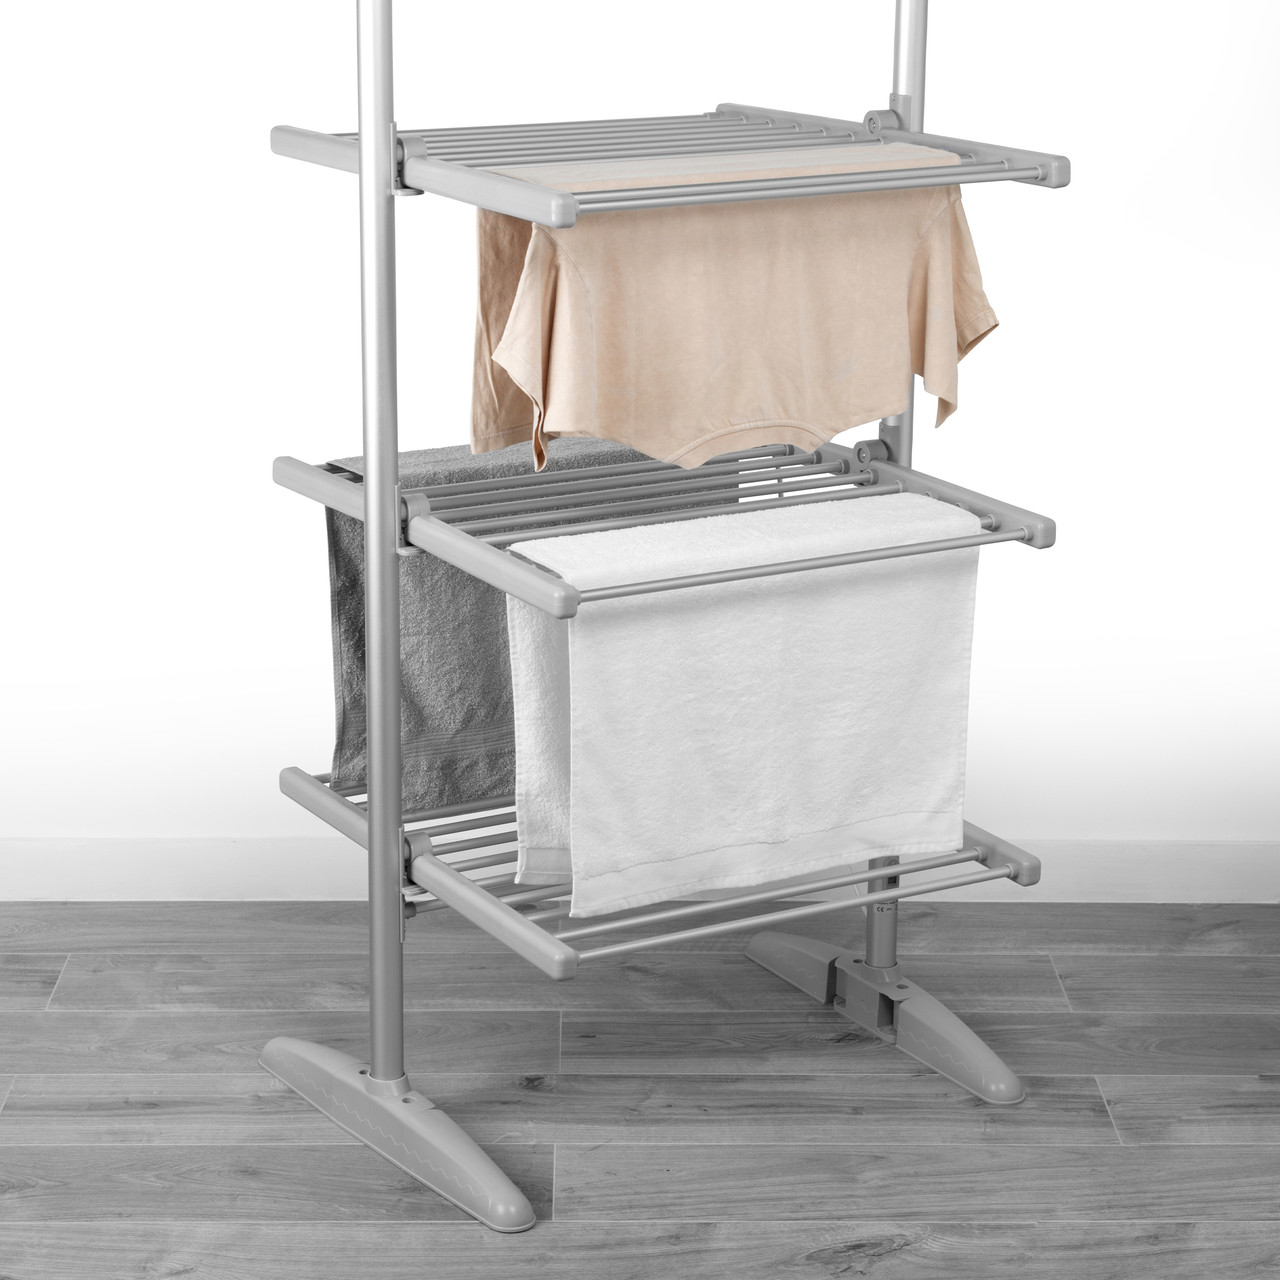  LBWF Electric Heated Clothes Drying Rack, Foldable